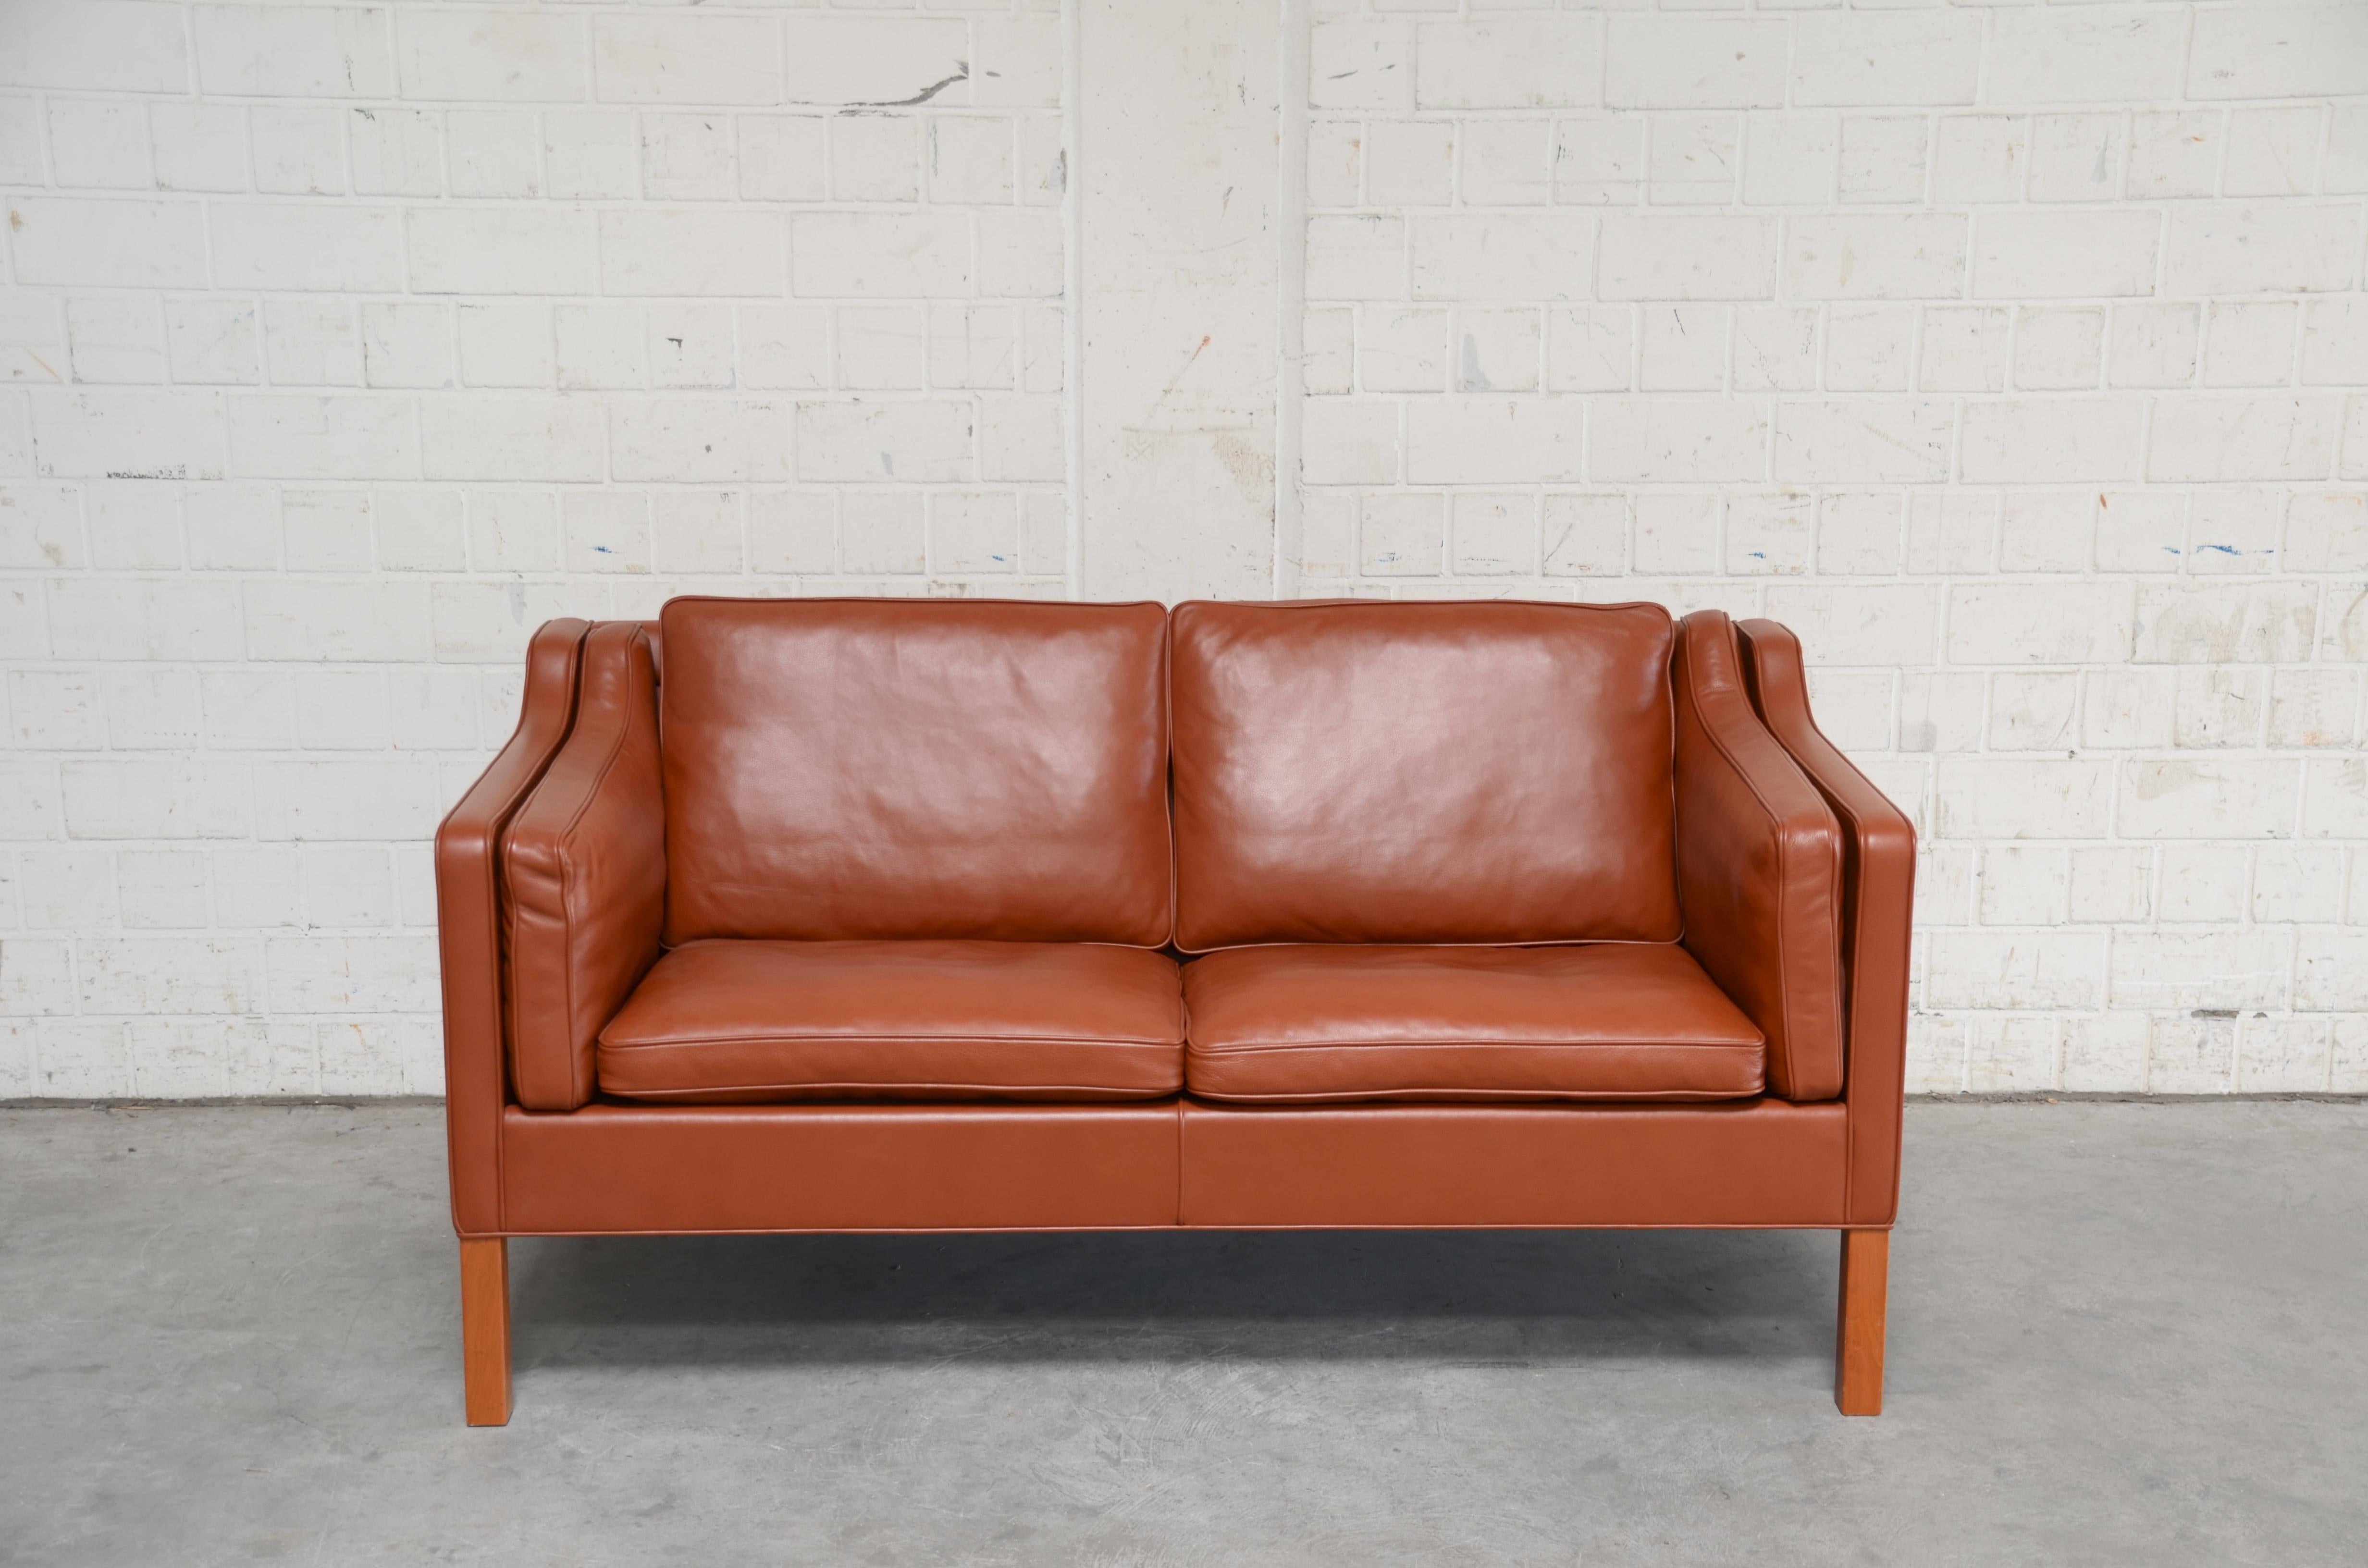 Borge Mogensen designed this leather sofa model 2212 for Fredericia Stolefabrik.
It´s a semianilne red brandy cognac leather with teak feet.
A Danish masterpiece of upholstery design and great seating comfort.
